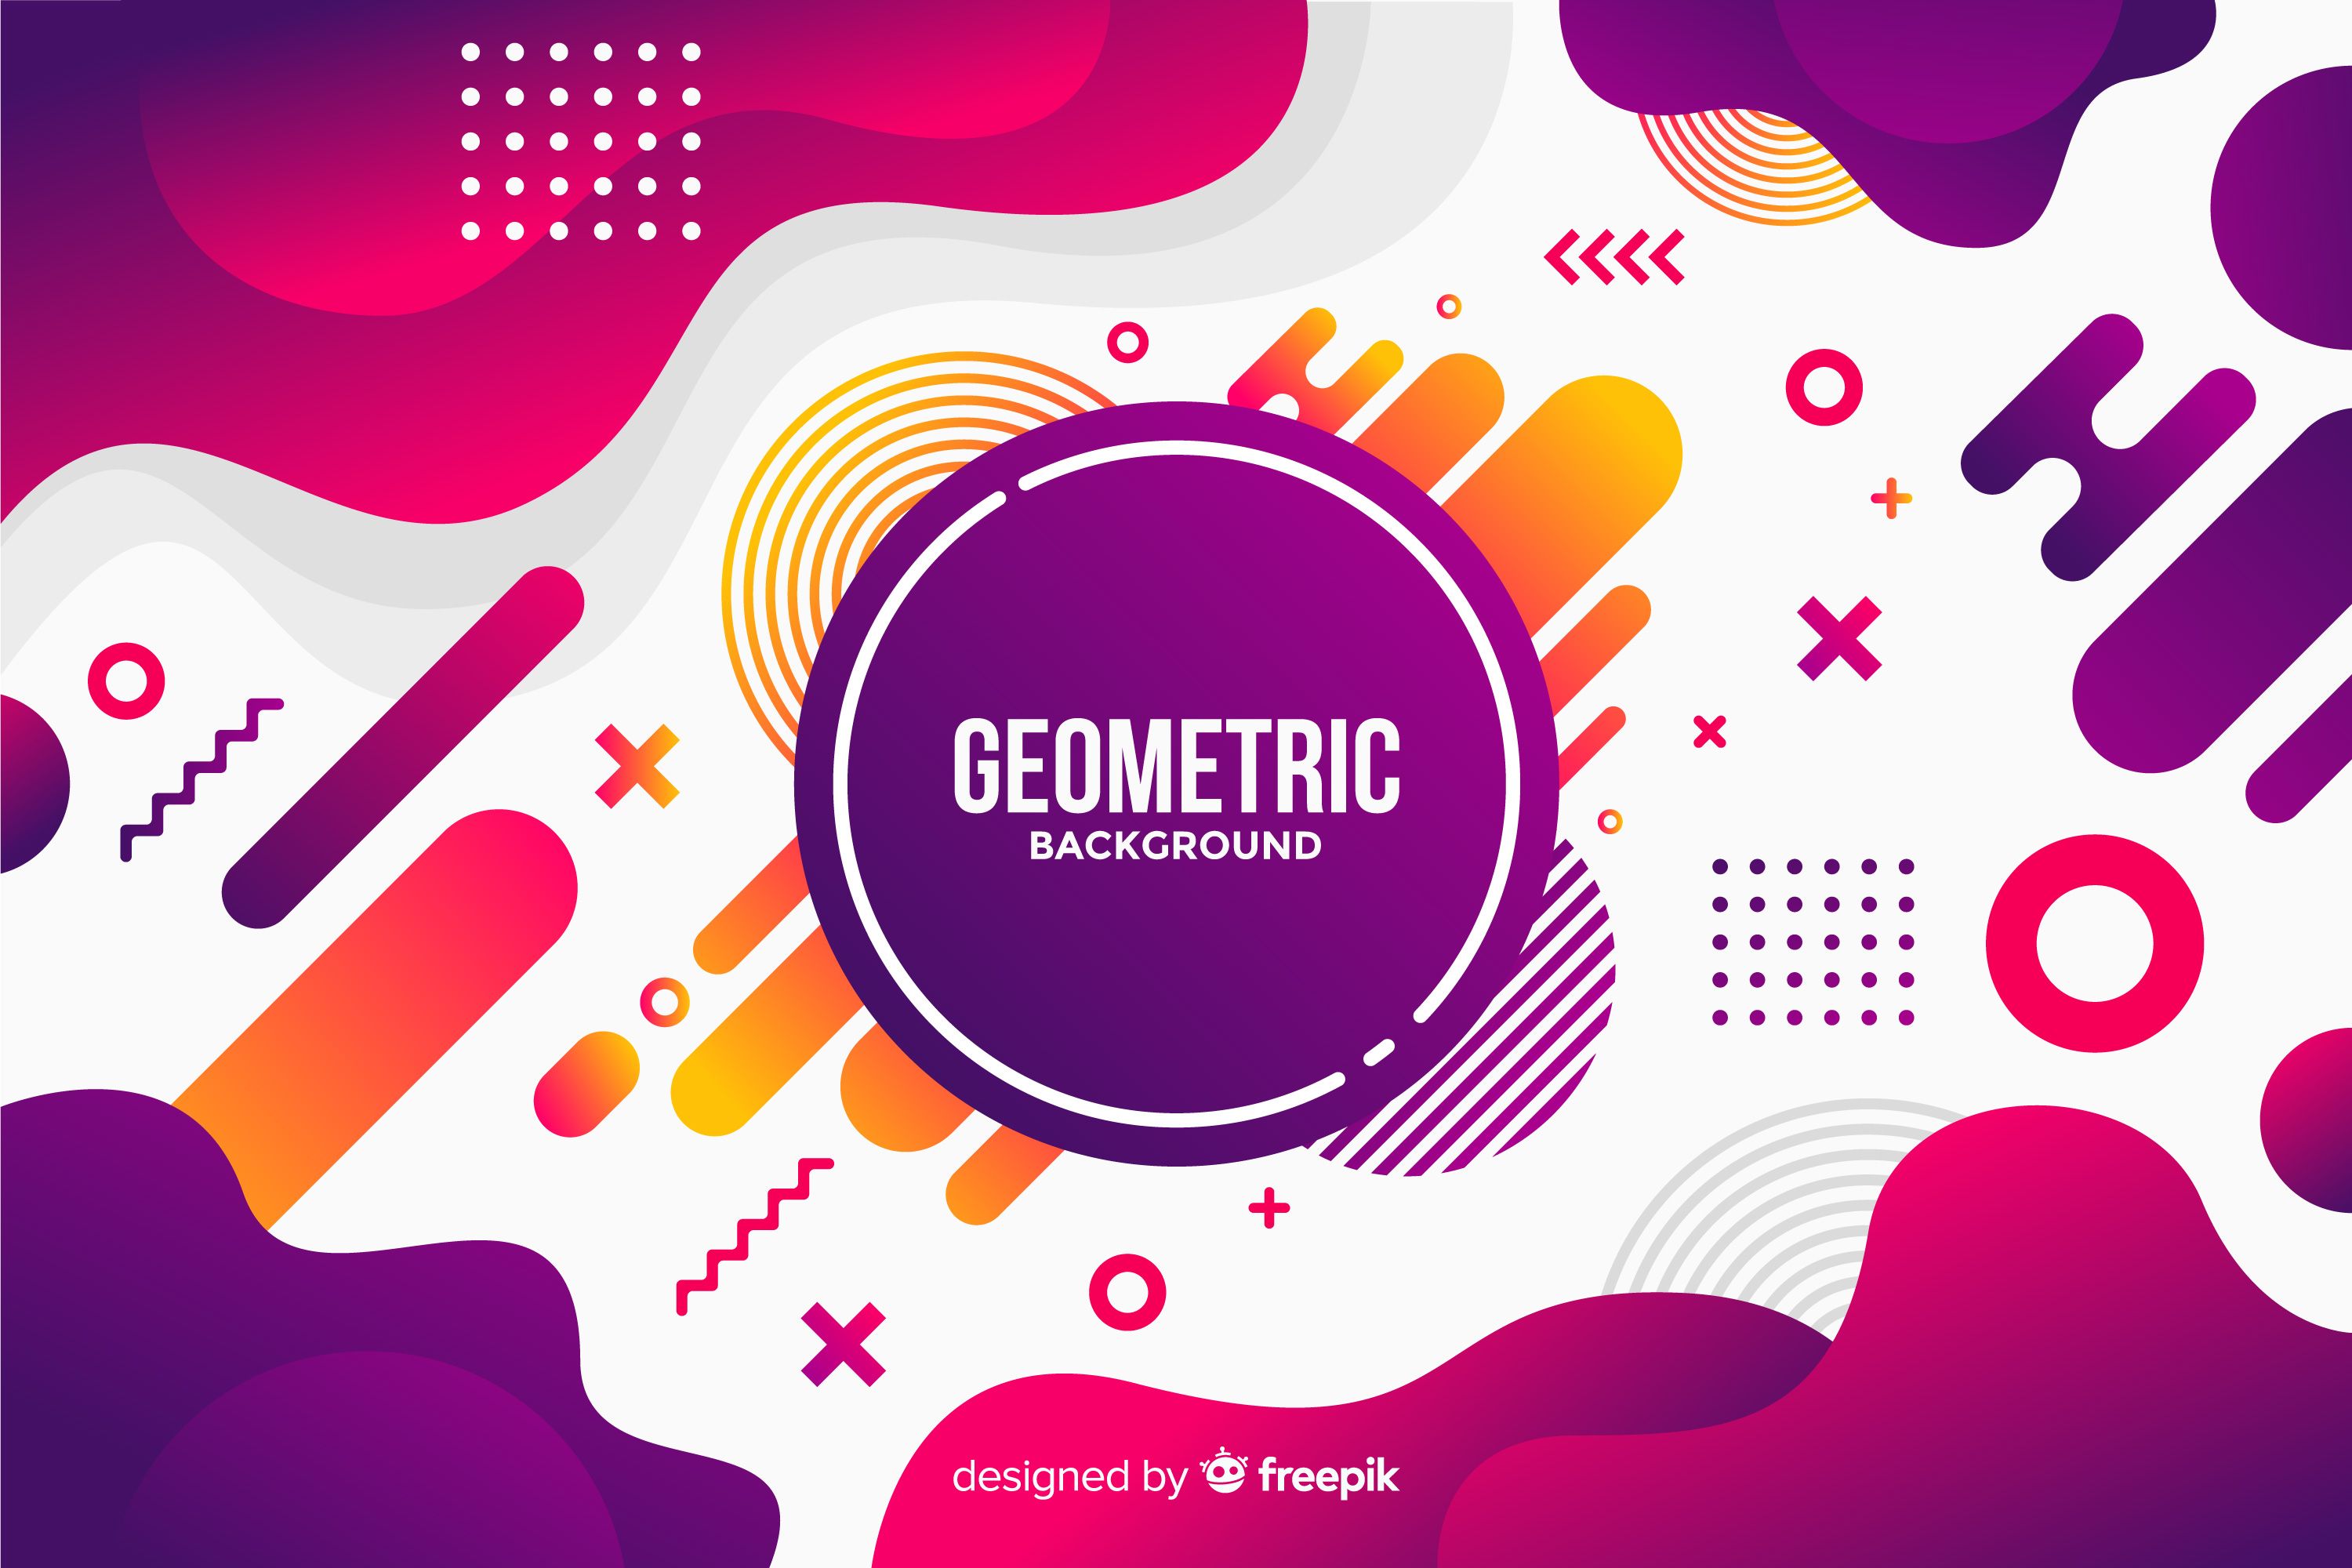 free-download-geometric-background-poster-template-design-poster